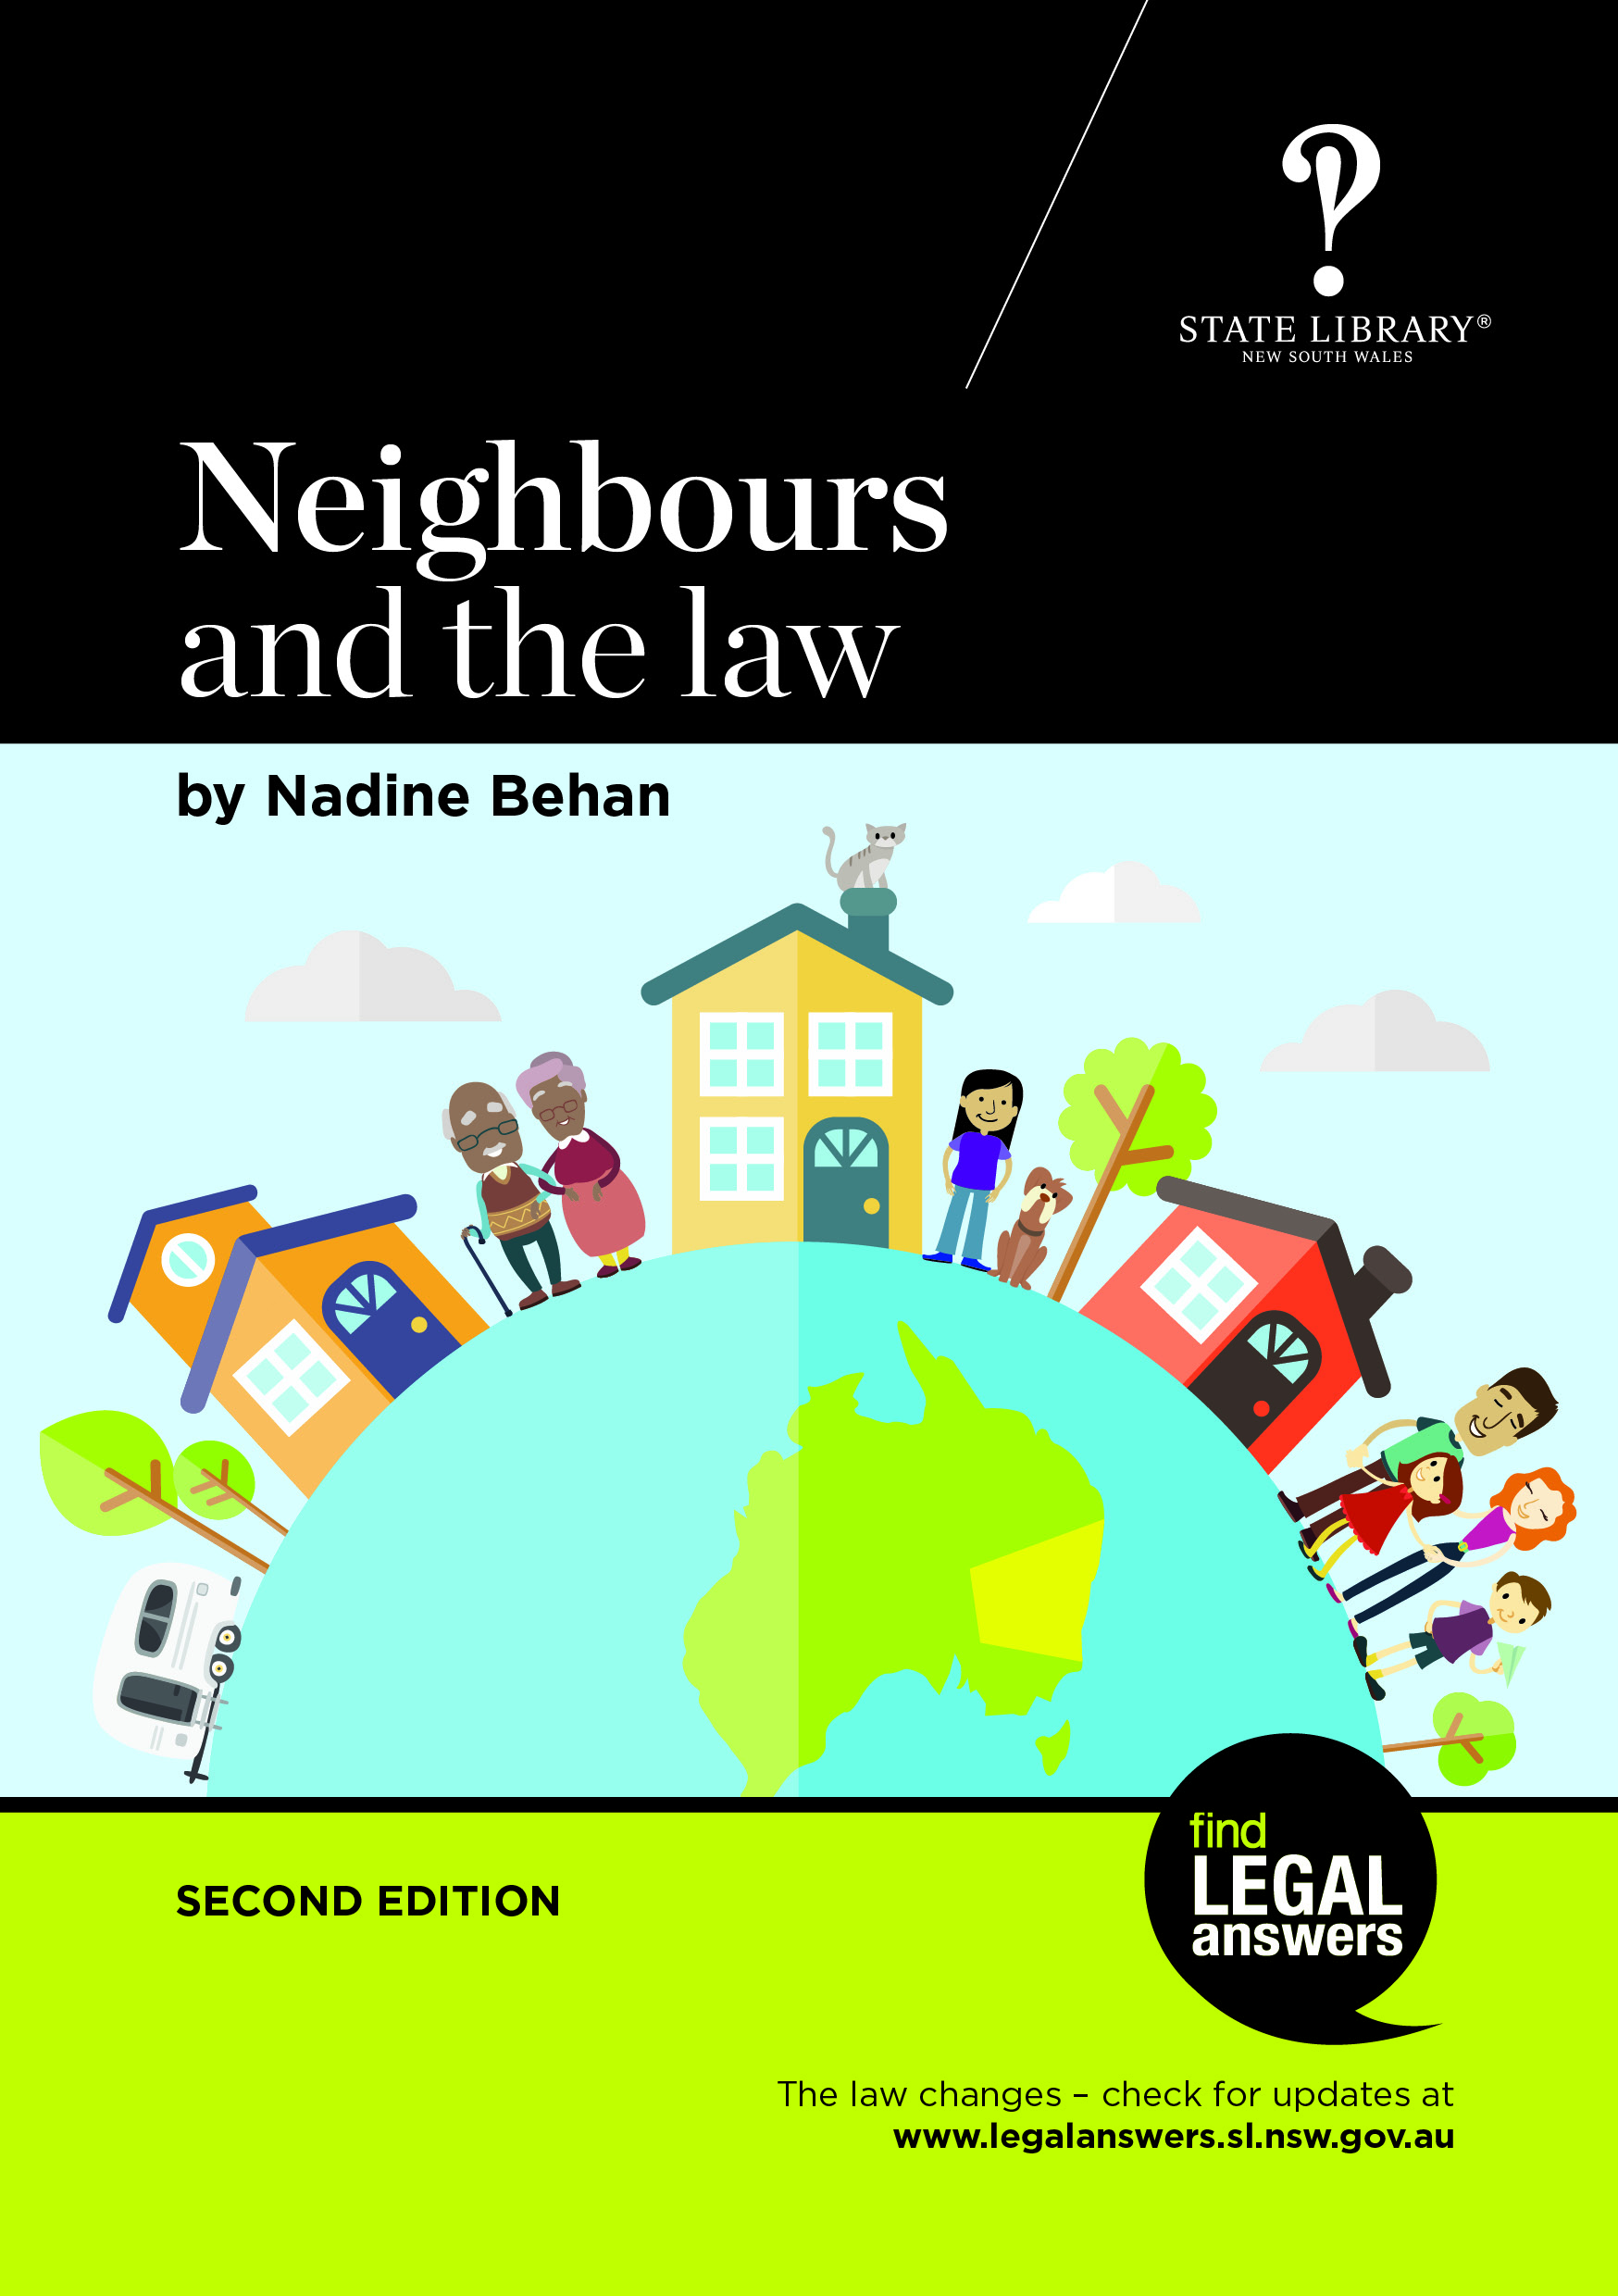 Cover image of Neighbours and the law, graphic image of people and houses